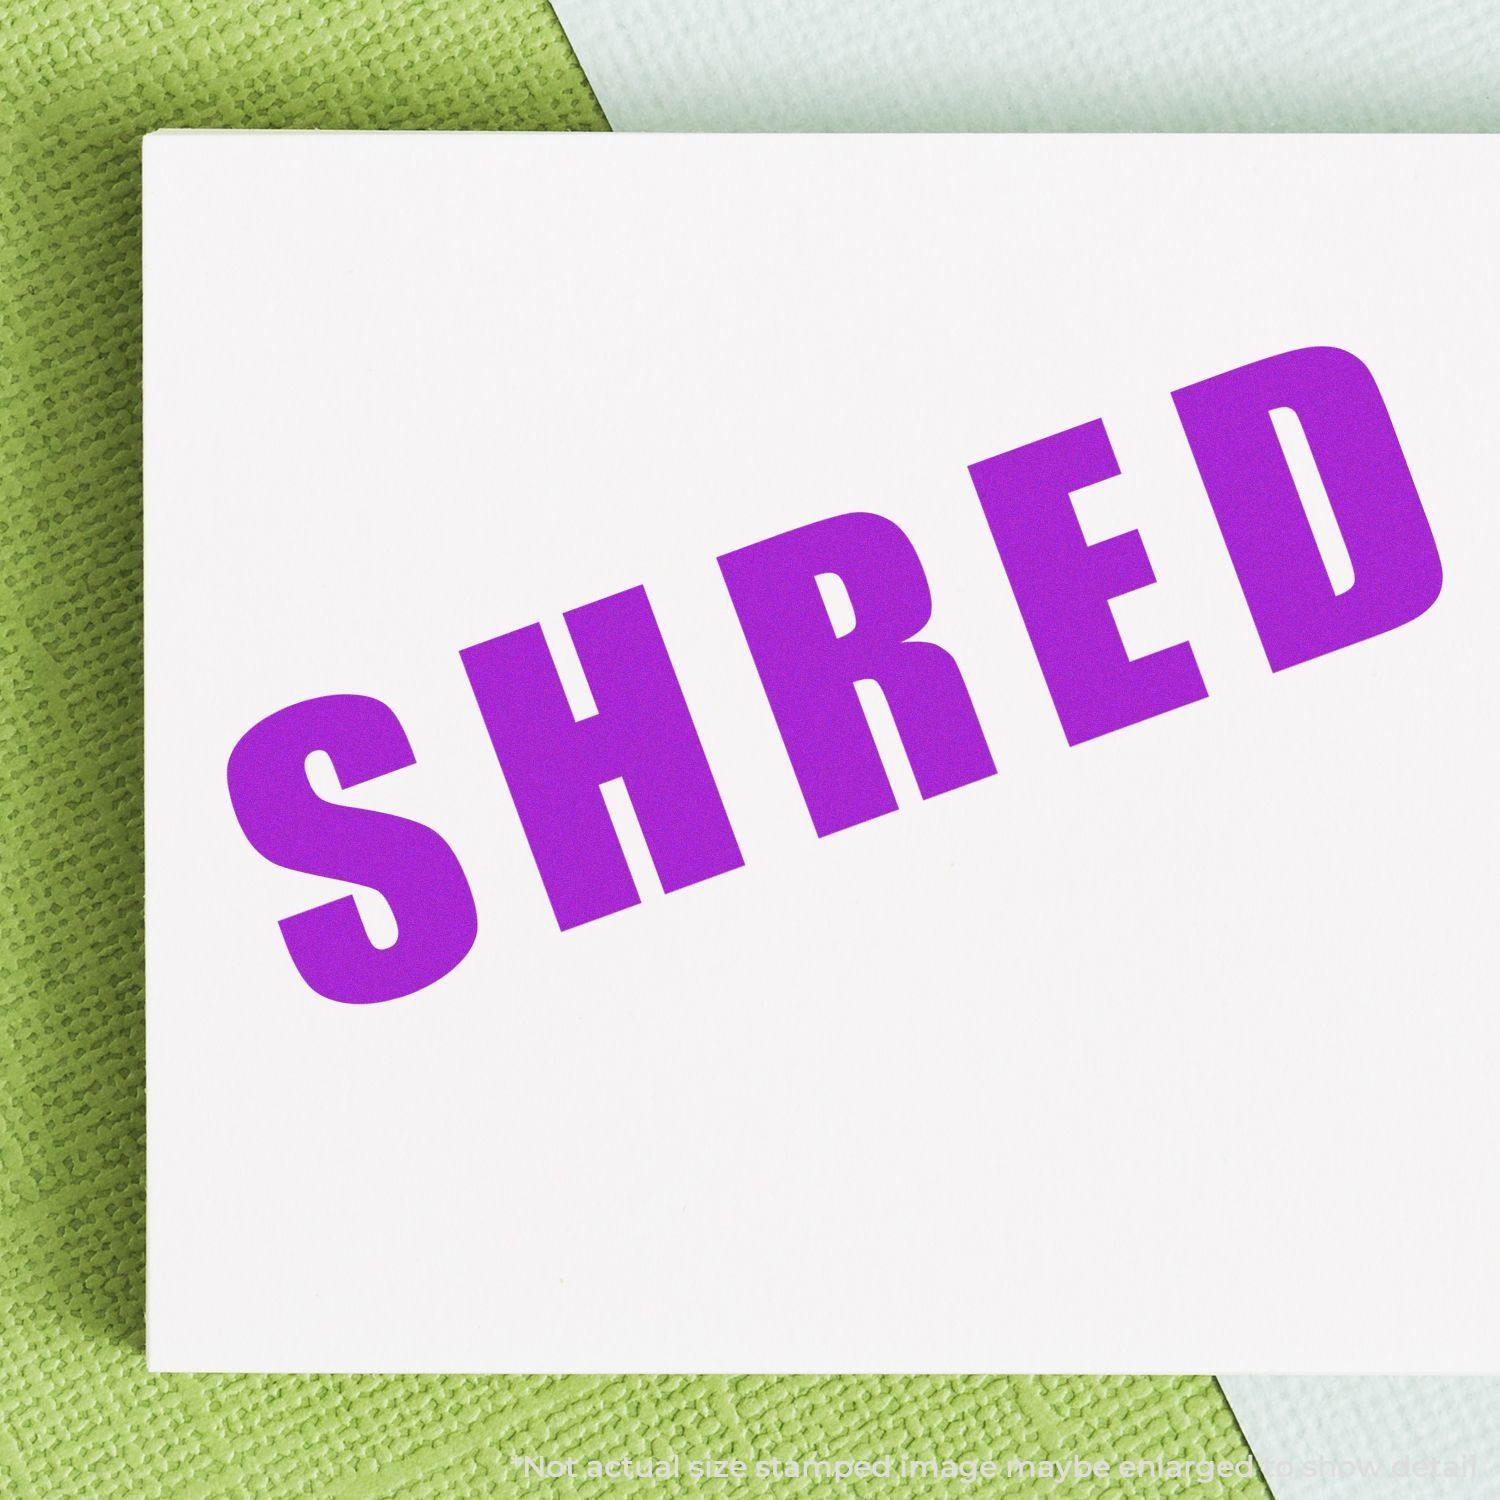 A self-inking stamp with a stamped image showing how the text "SHRED" in a large bold font is displayed by it after stamping.